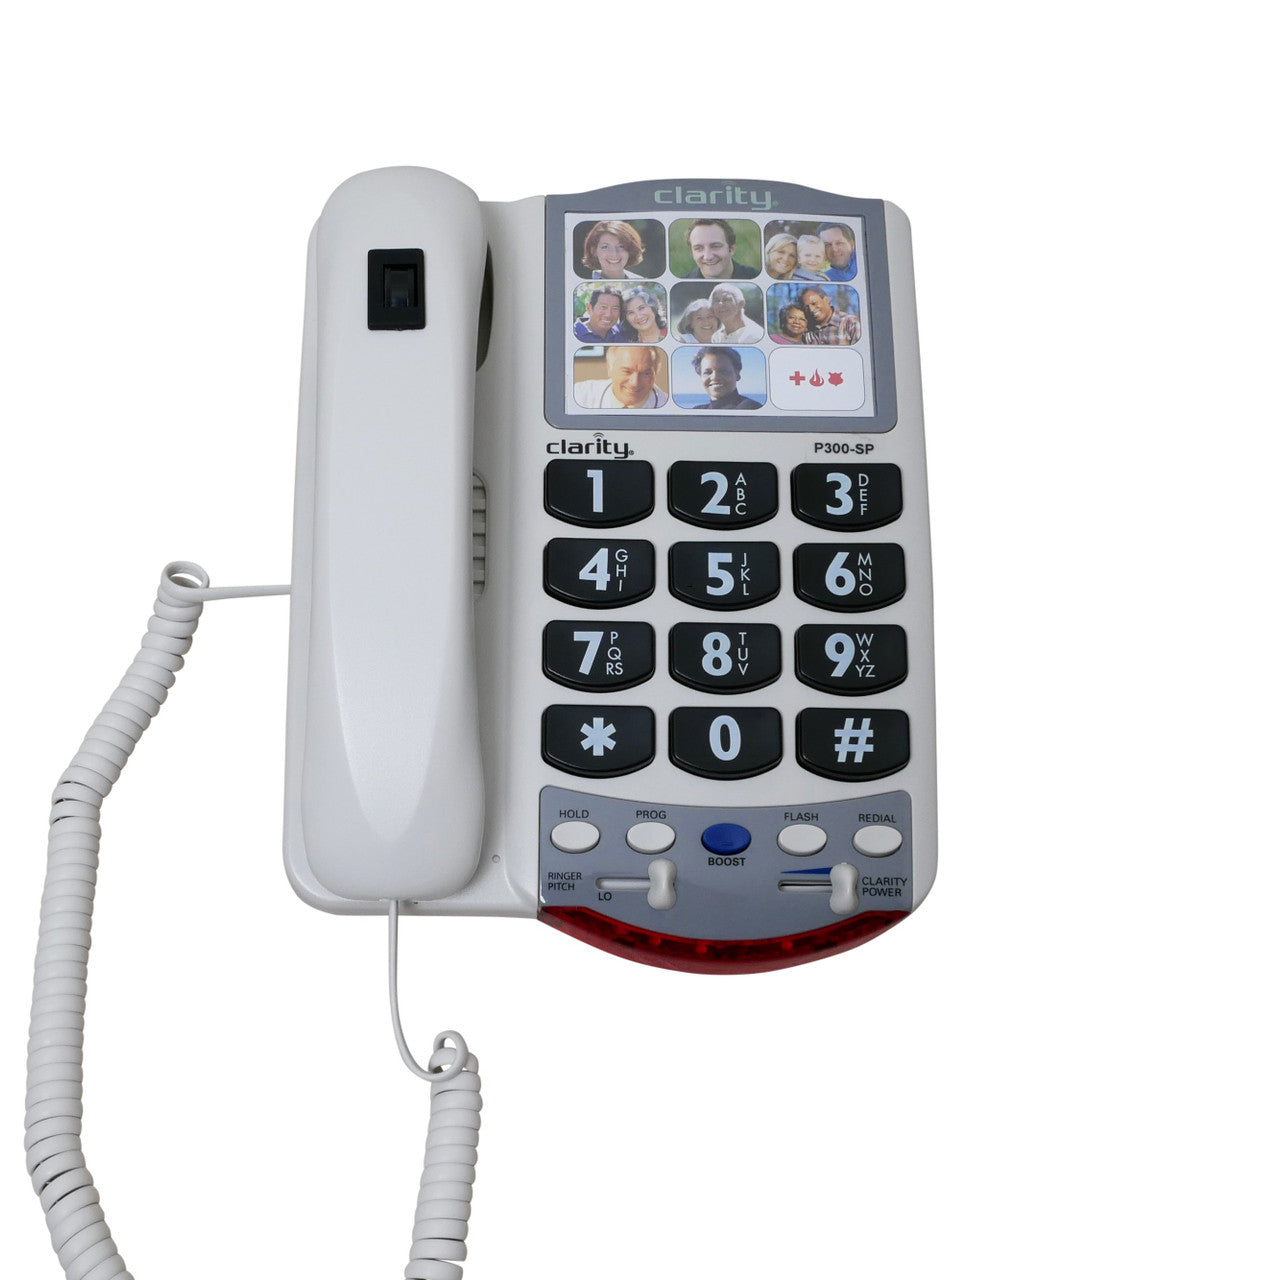 Clarity P300-SP Outgoing Speech Amplified Phone